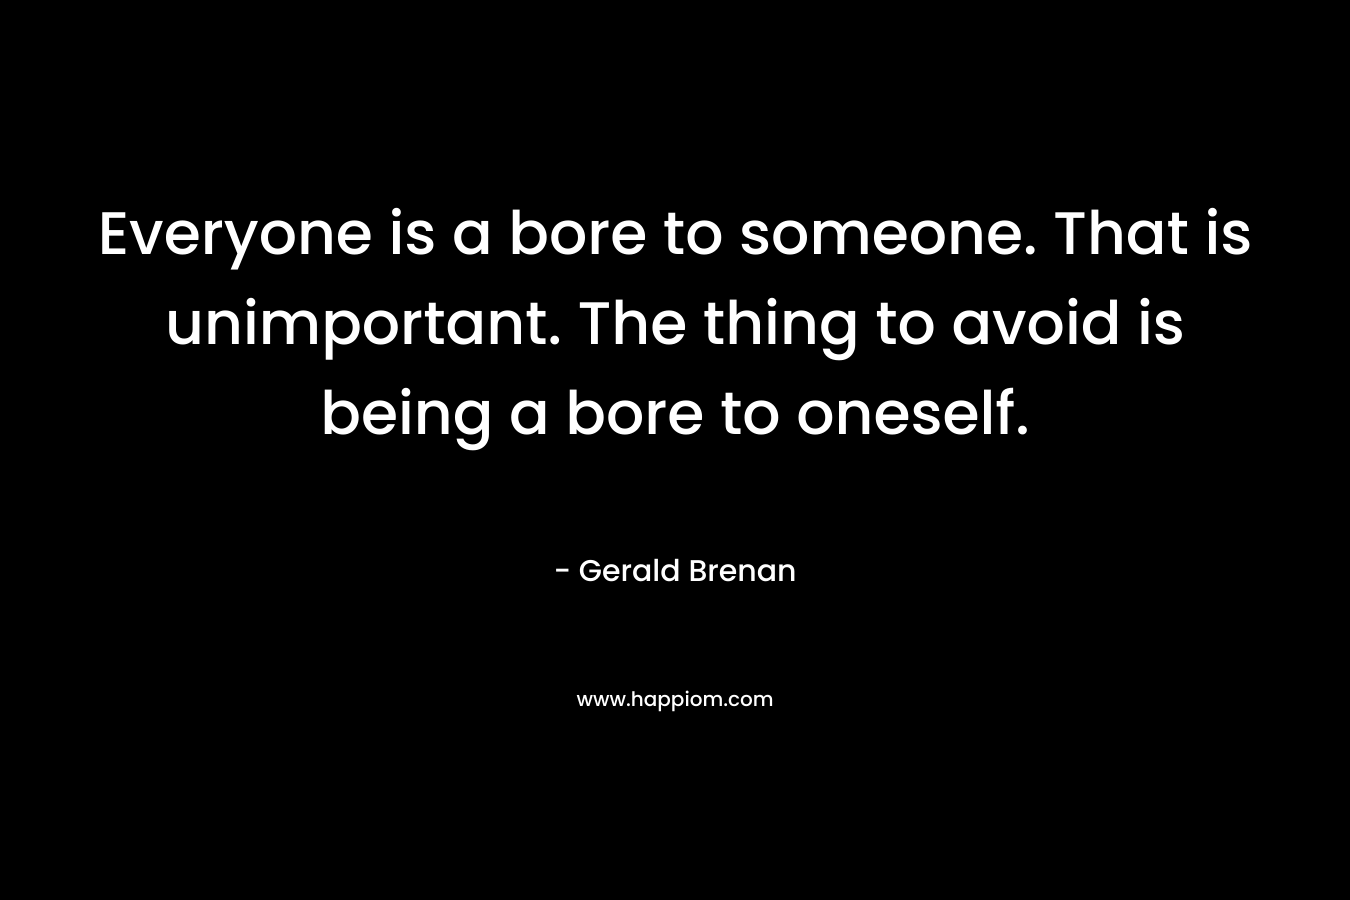 Everyone is a bore to someone. That is unimportant. The thing to avoid is being a bore to oneself.